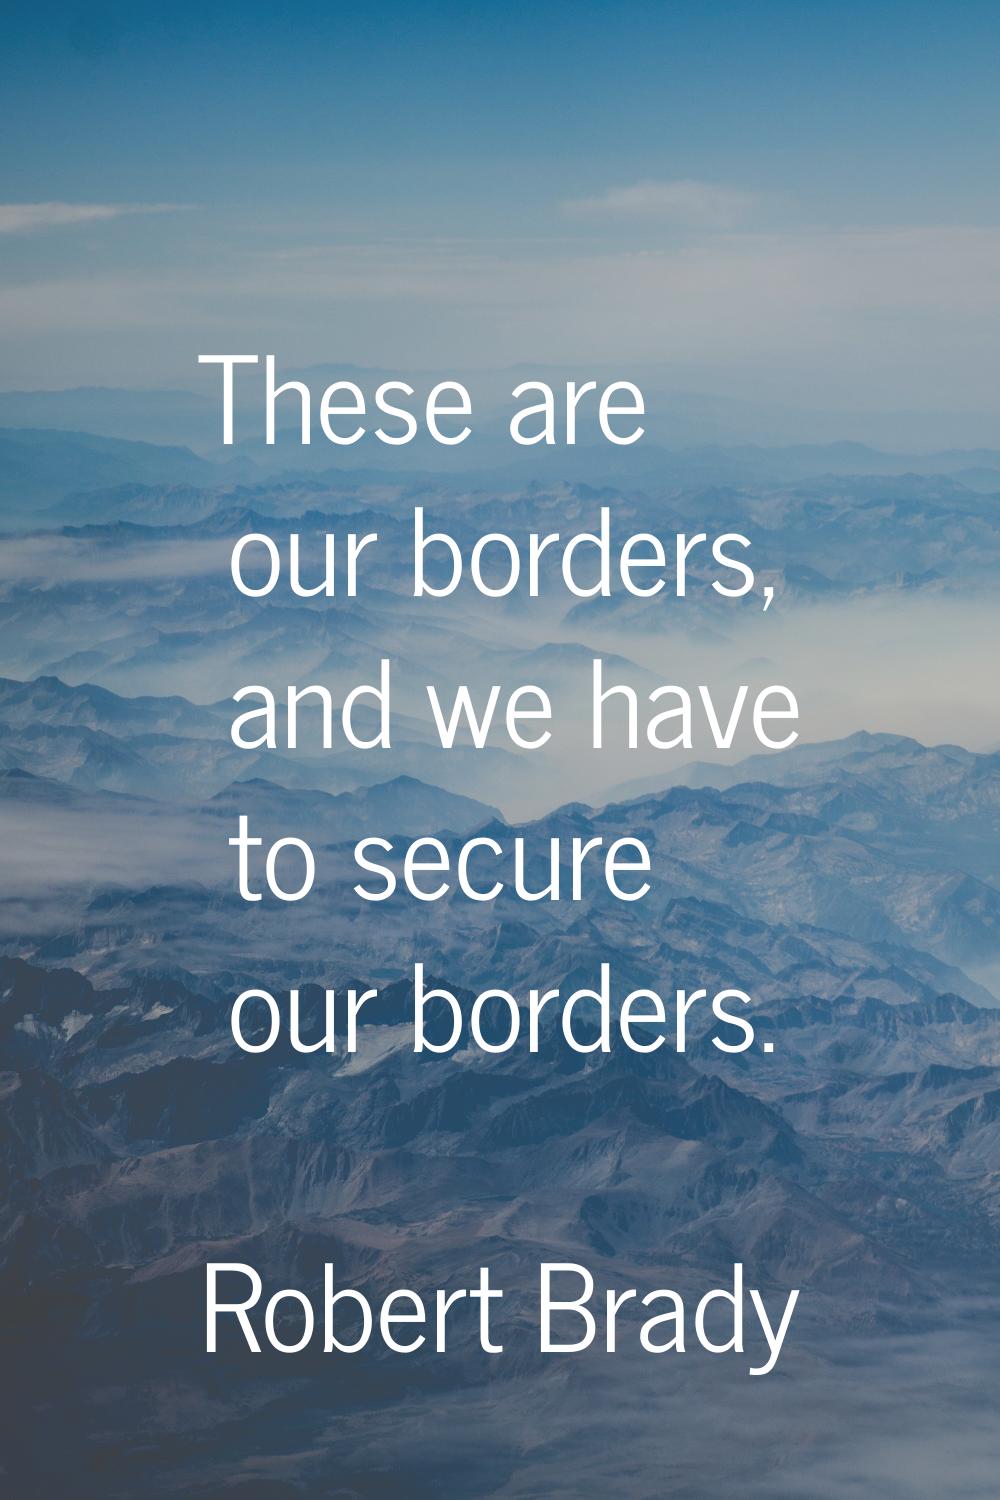 These are our borders, and we have to secure our borders.